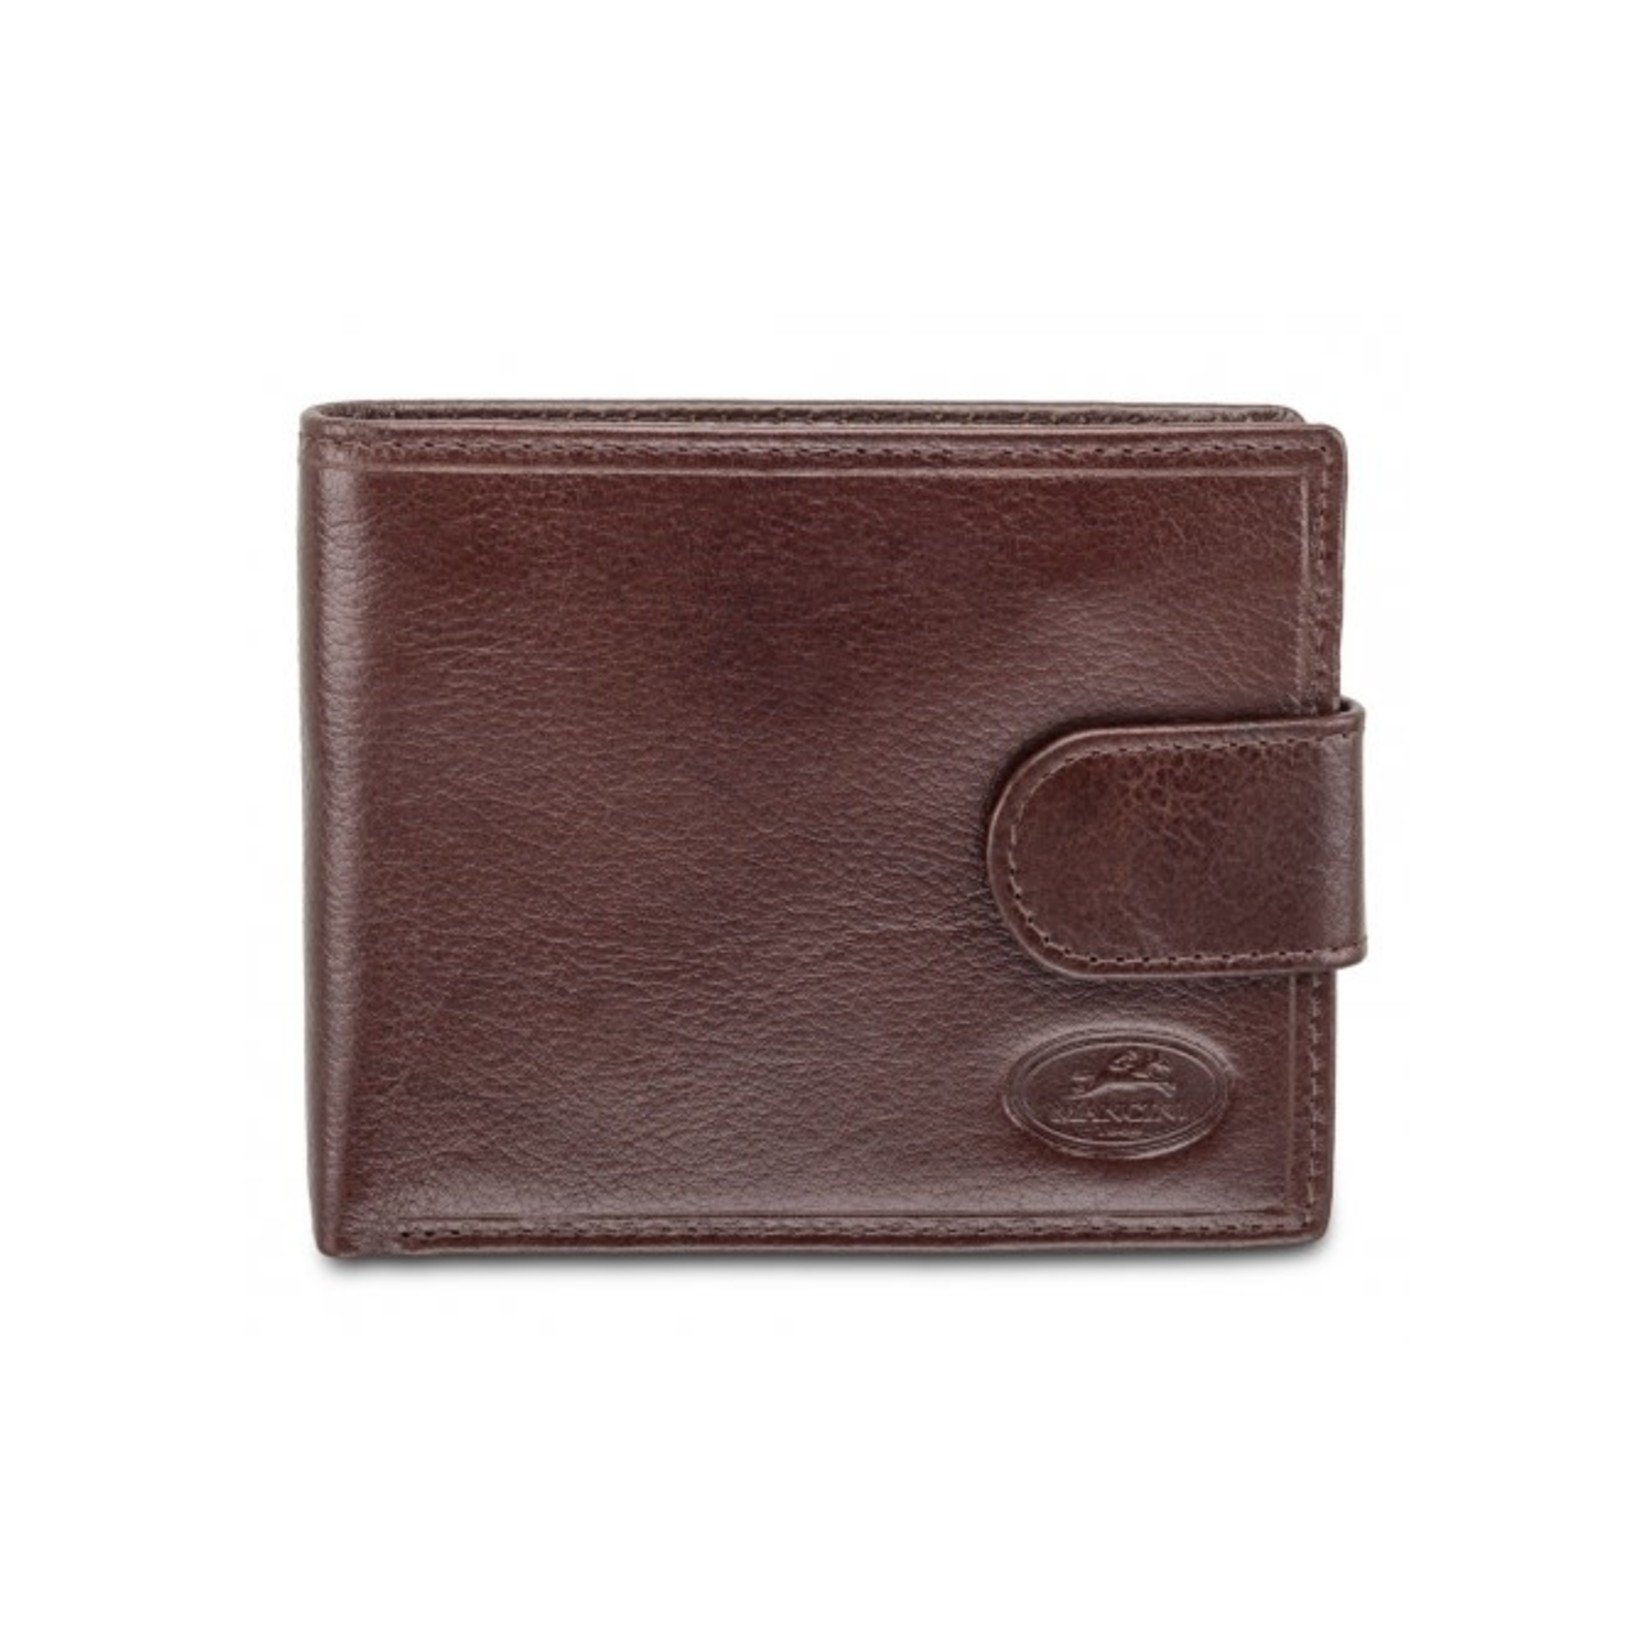 MANCINI EQUESTRIAN RFID DELUXE MEN'S WALLET COIN